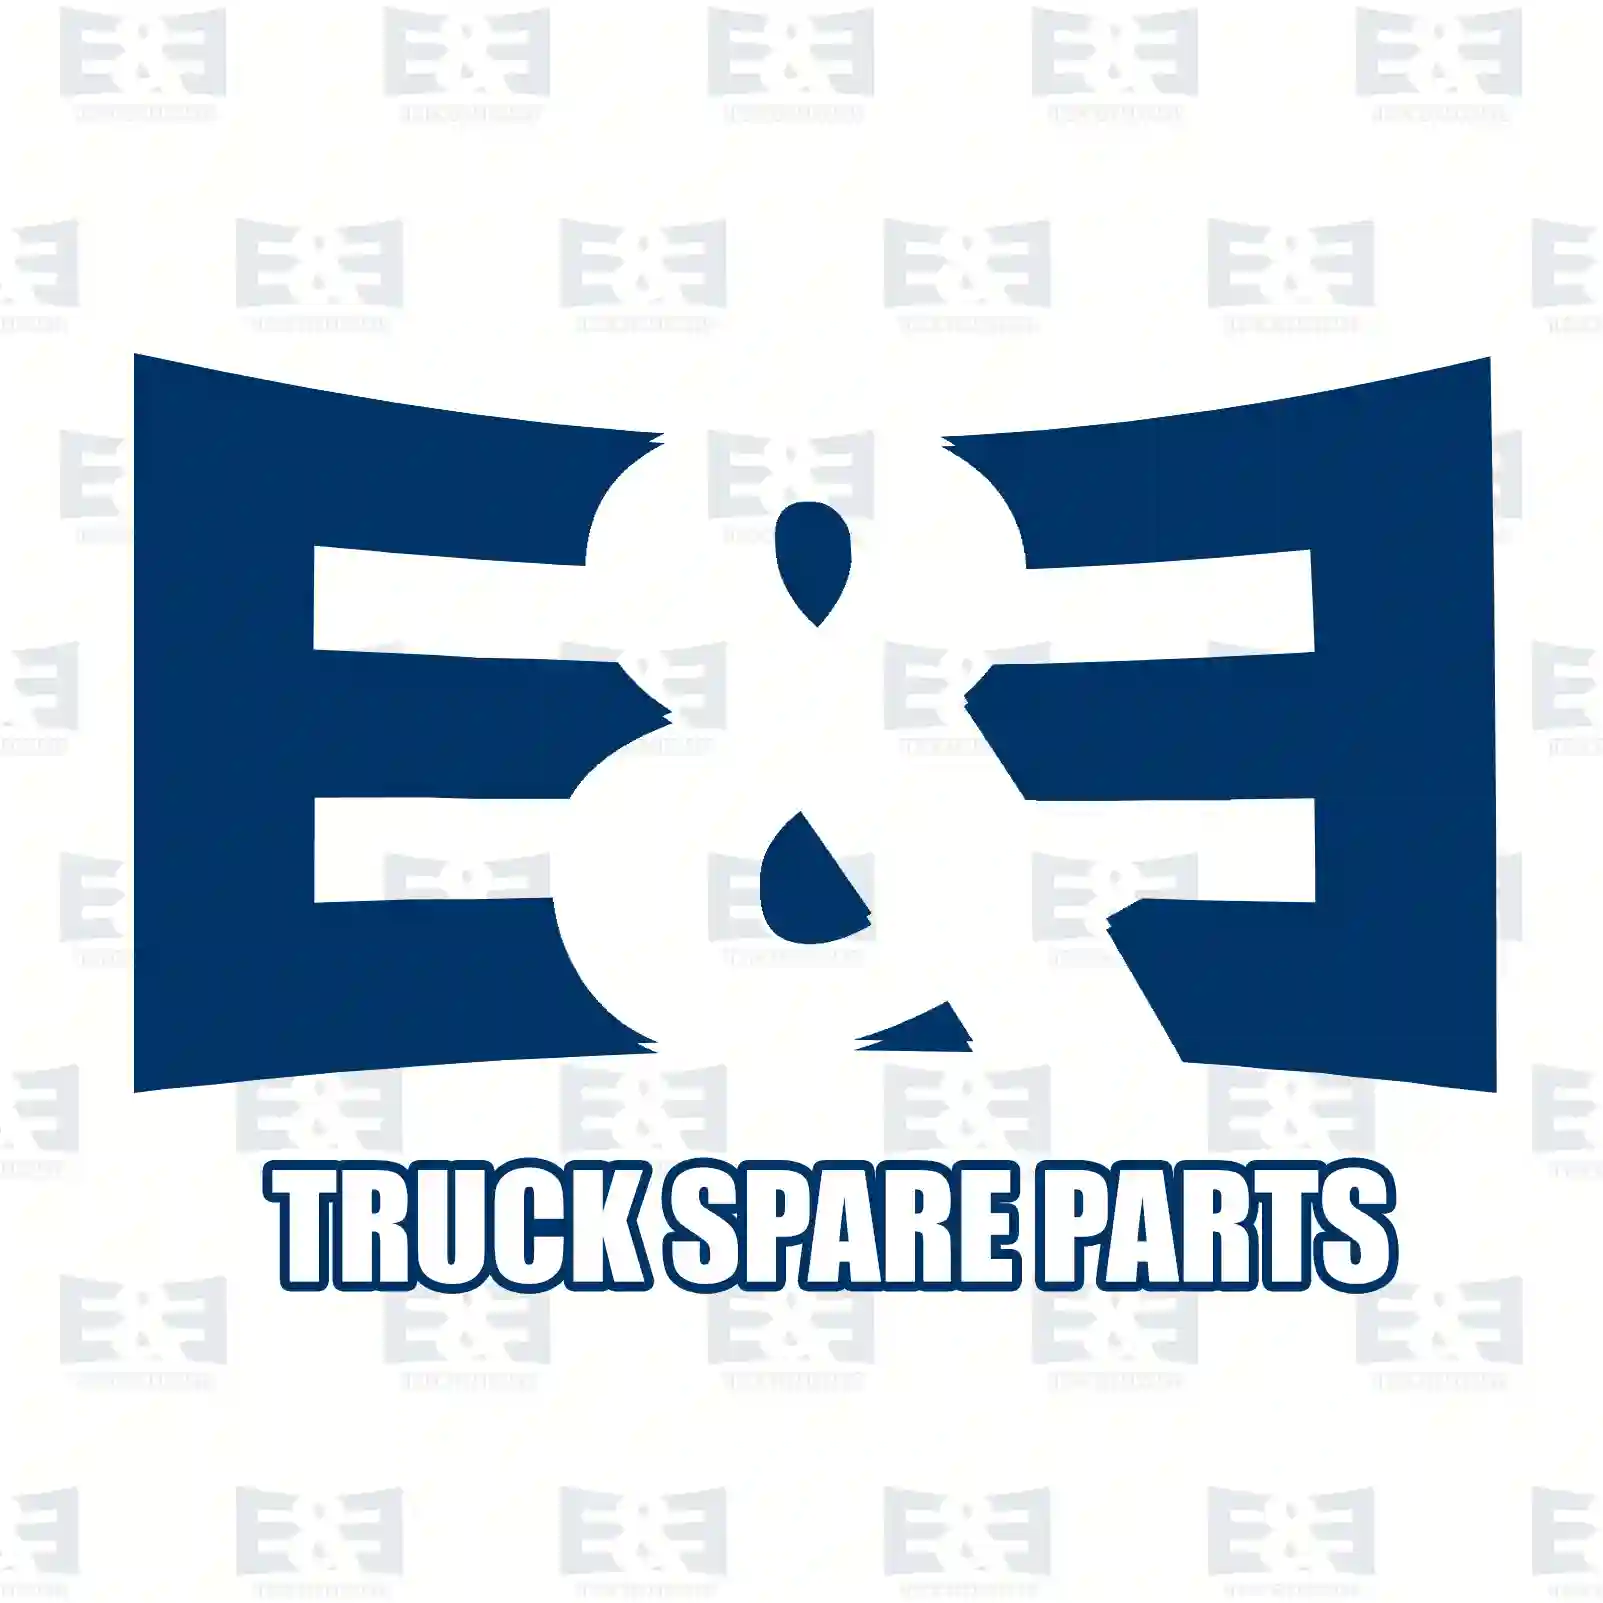 Joint Cross Joint cross, EE No 2E2276027 ,  oem no:81391266031, 2V5521131 E&E Truck Spare Parts | Truck Spare Parts, Auotomotive Spare Parts